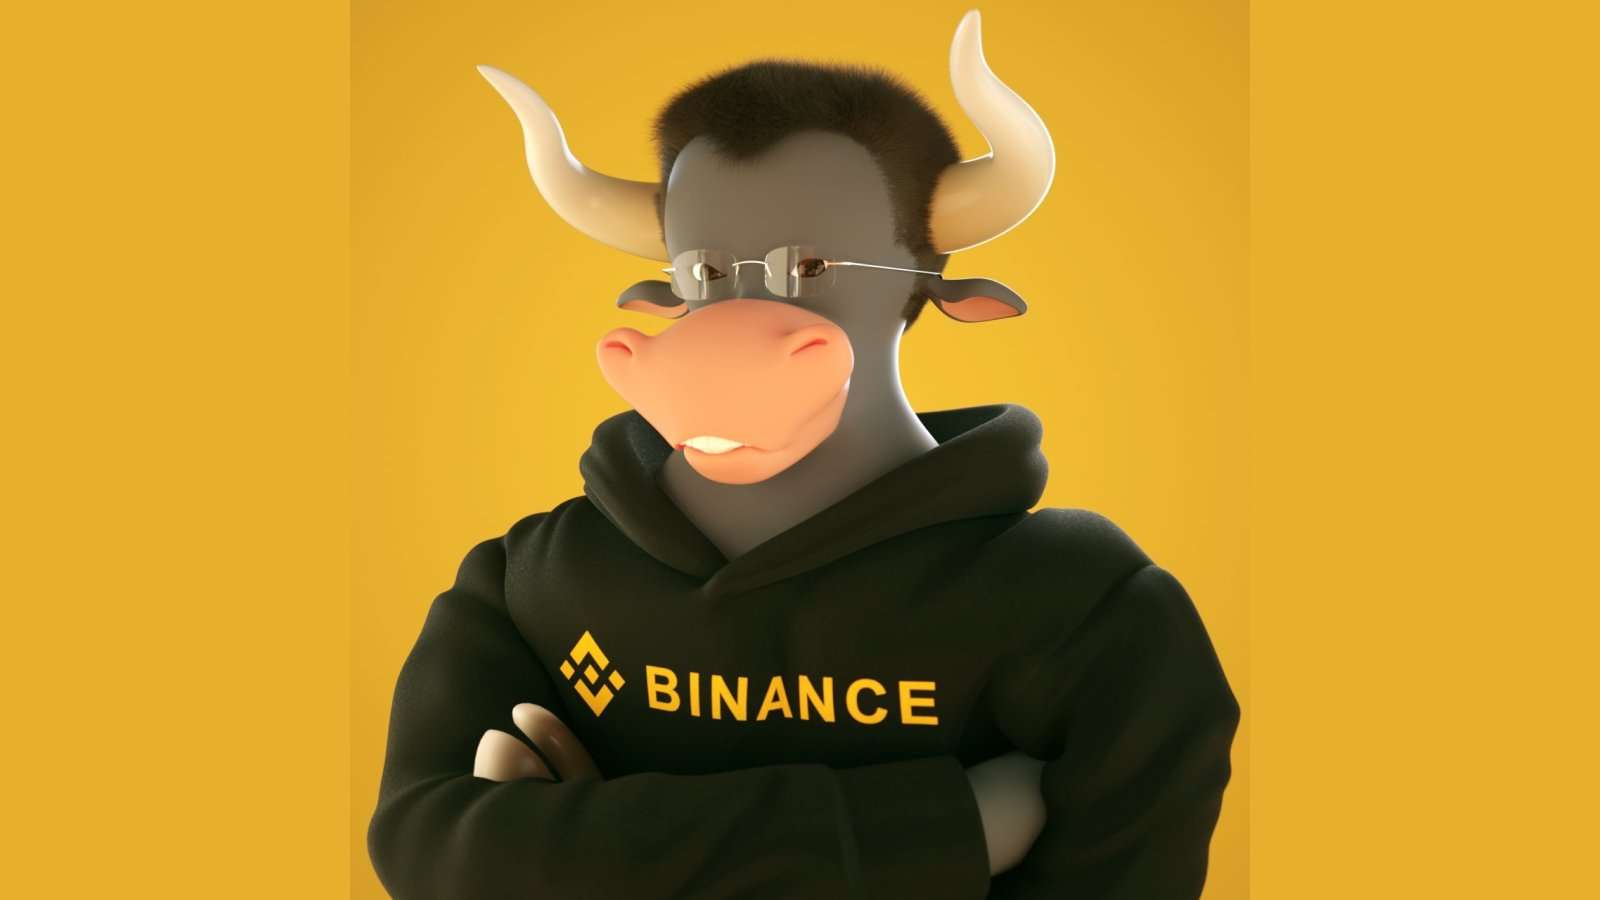 Binance Japan Empowers Millions of Crypto Traders with Exclusive Platform for SHIB, XRP, ADA, SOL, DOGE, and 27 Other Cryptos